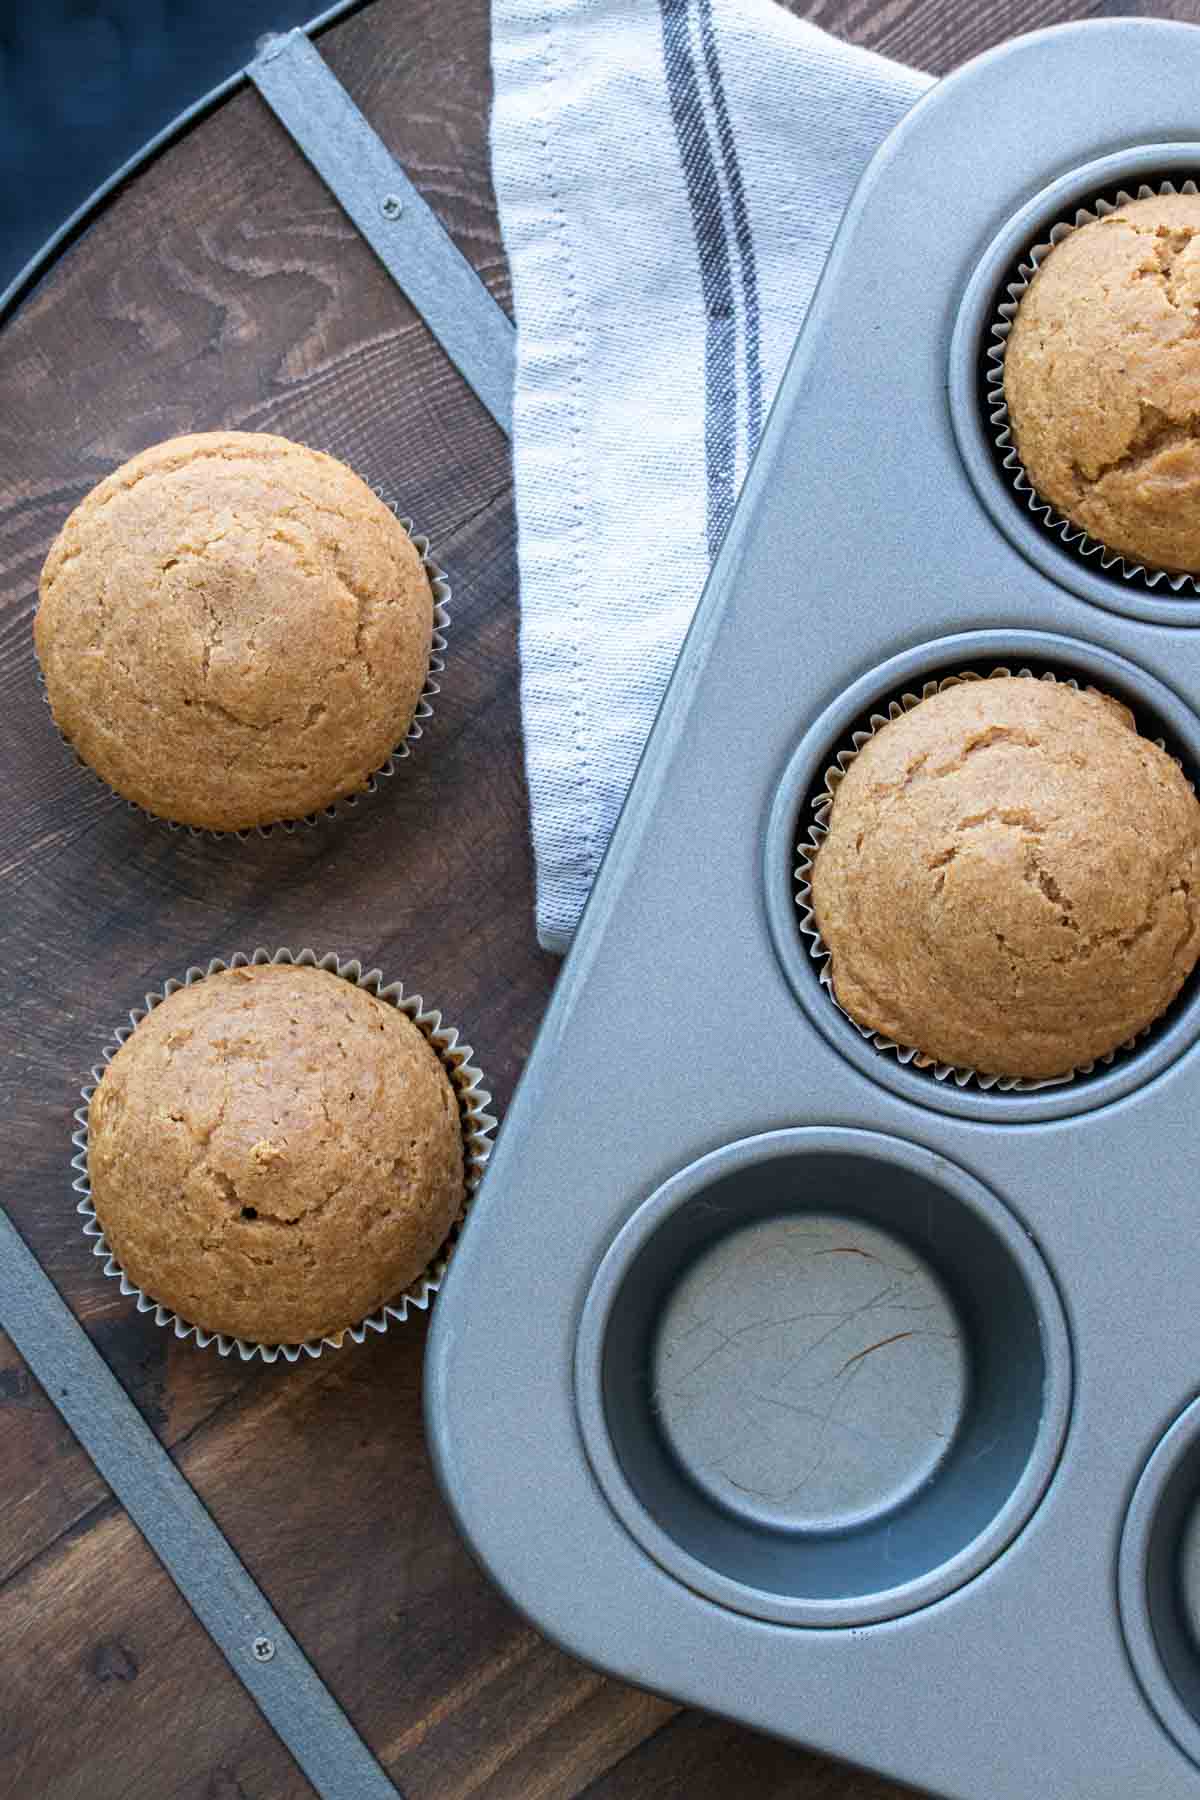 Baked pumpkin cupcakes in a muffin tin and on a wood table.